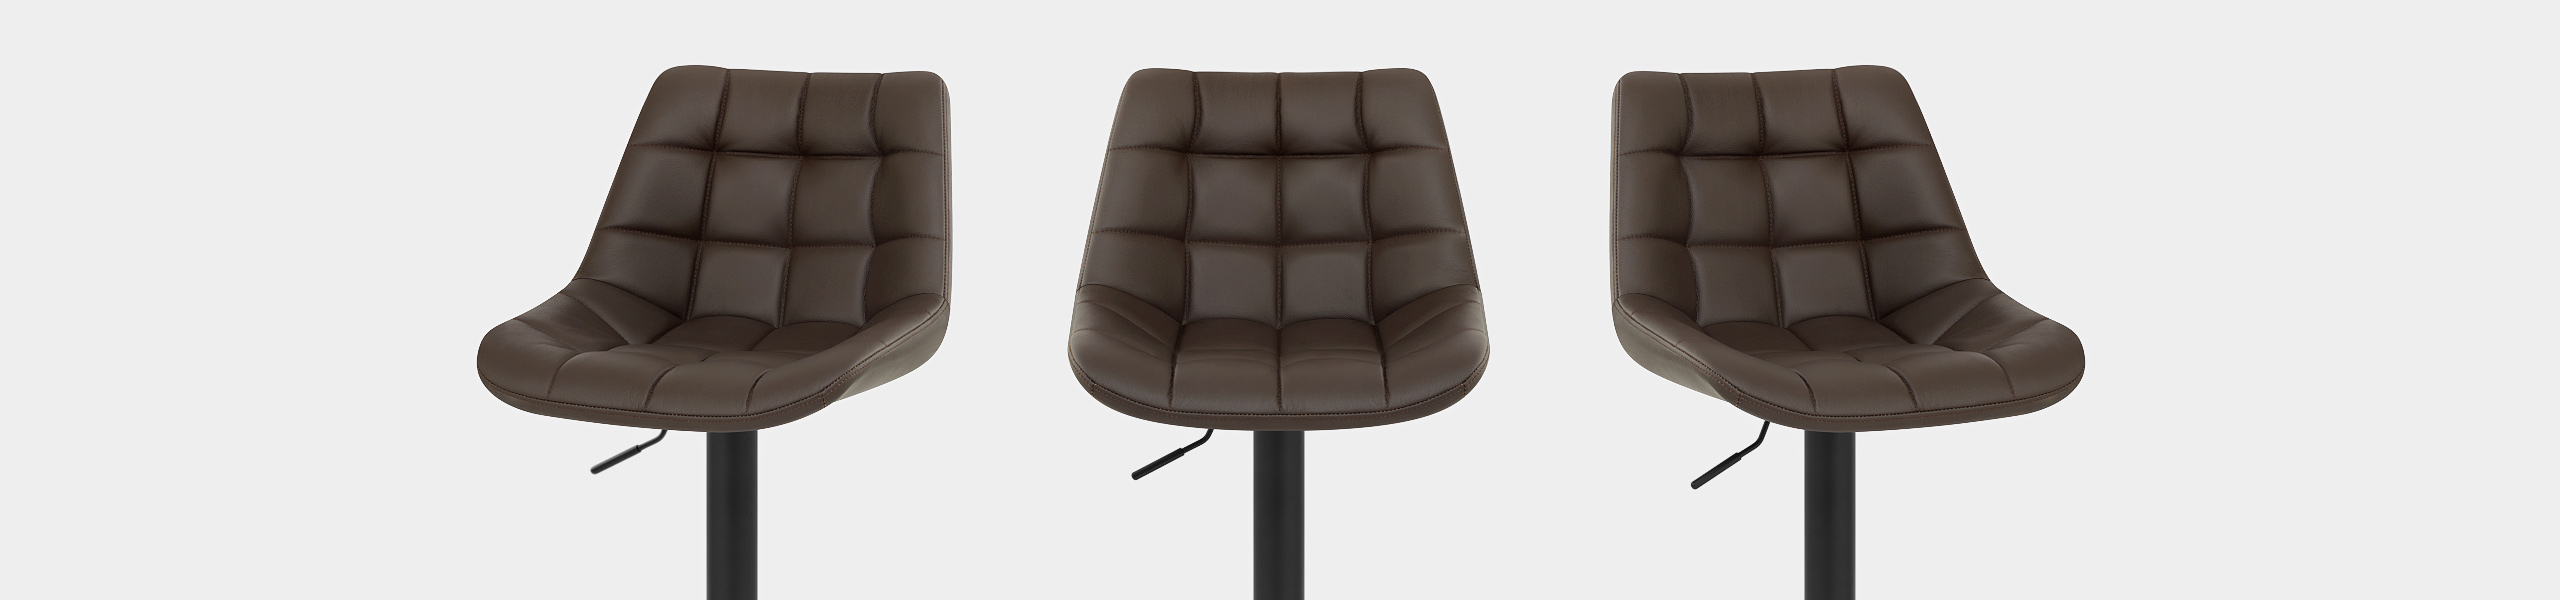 Porto Bar Stool Brown Leather Video Banner